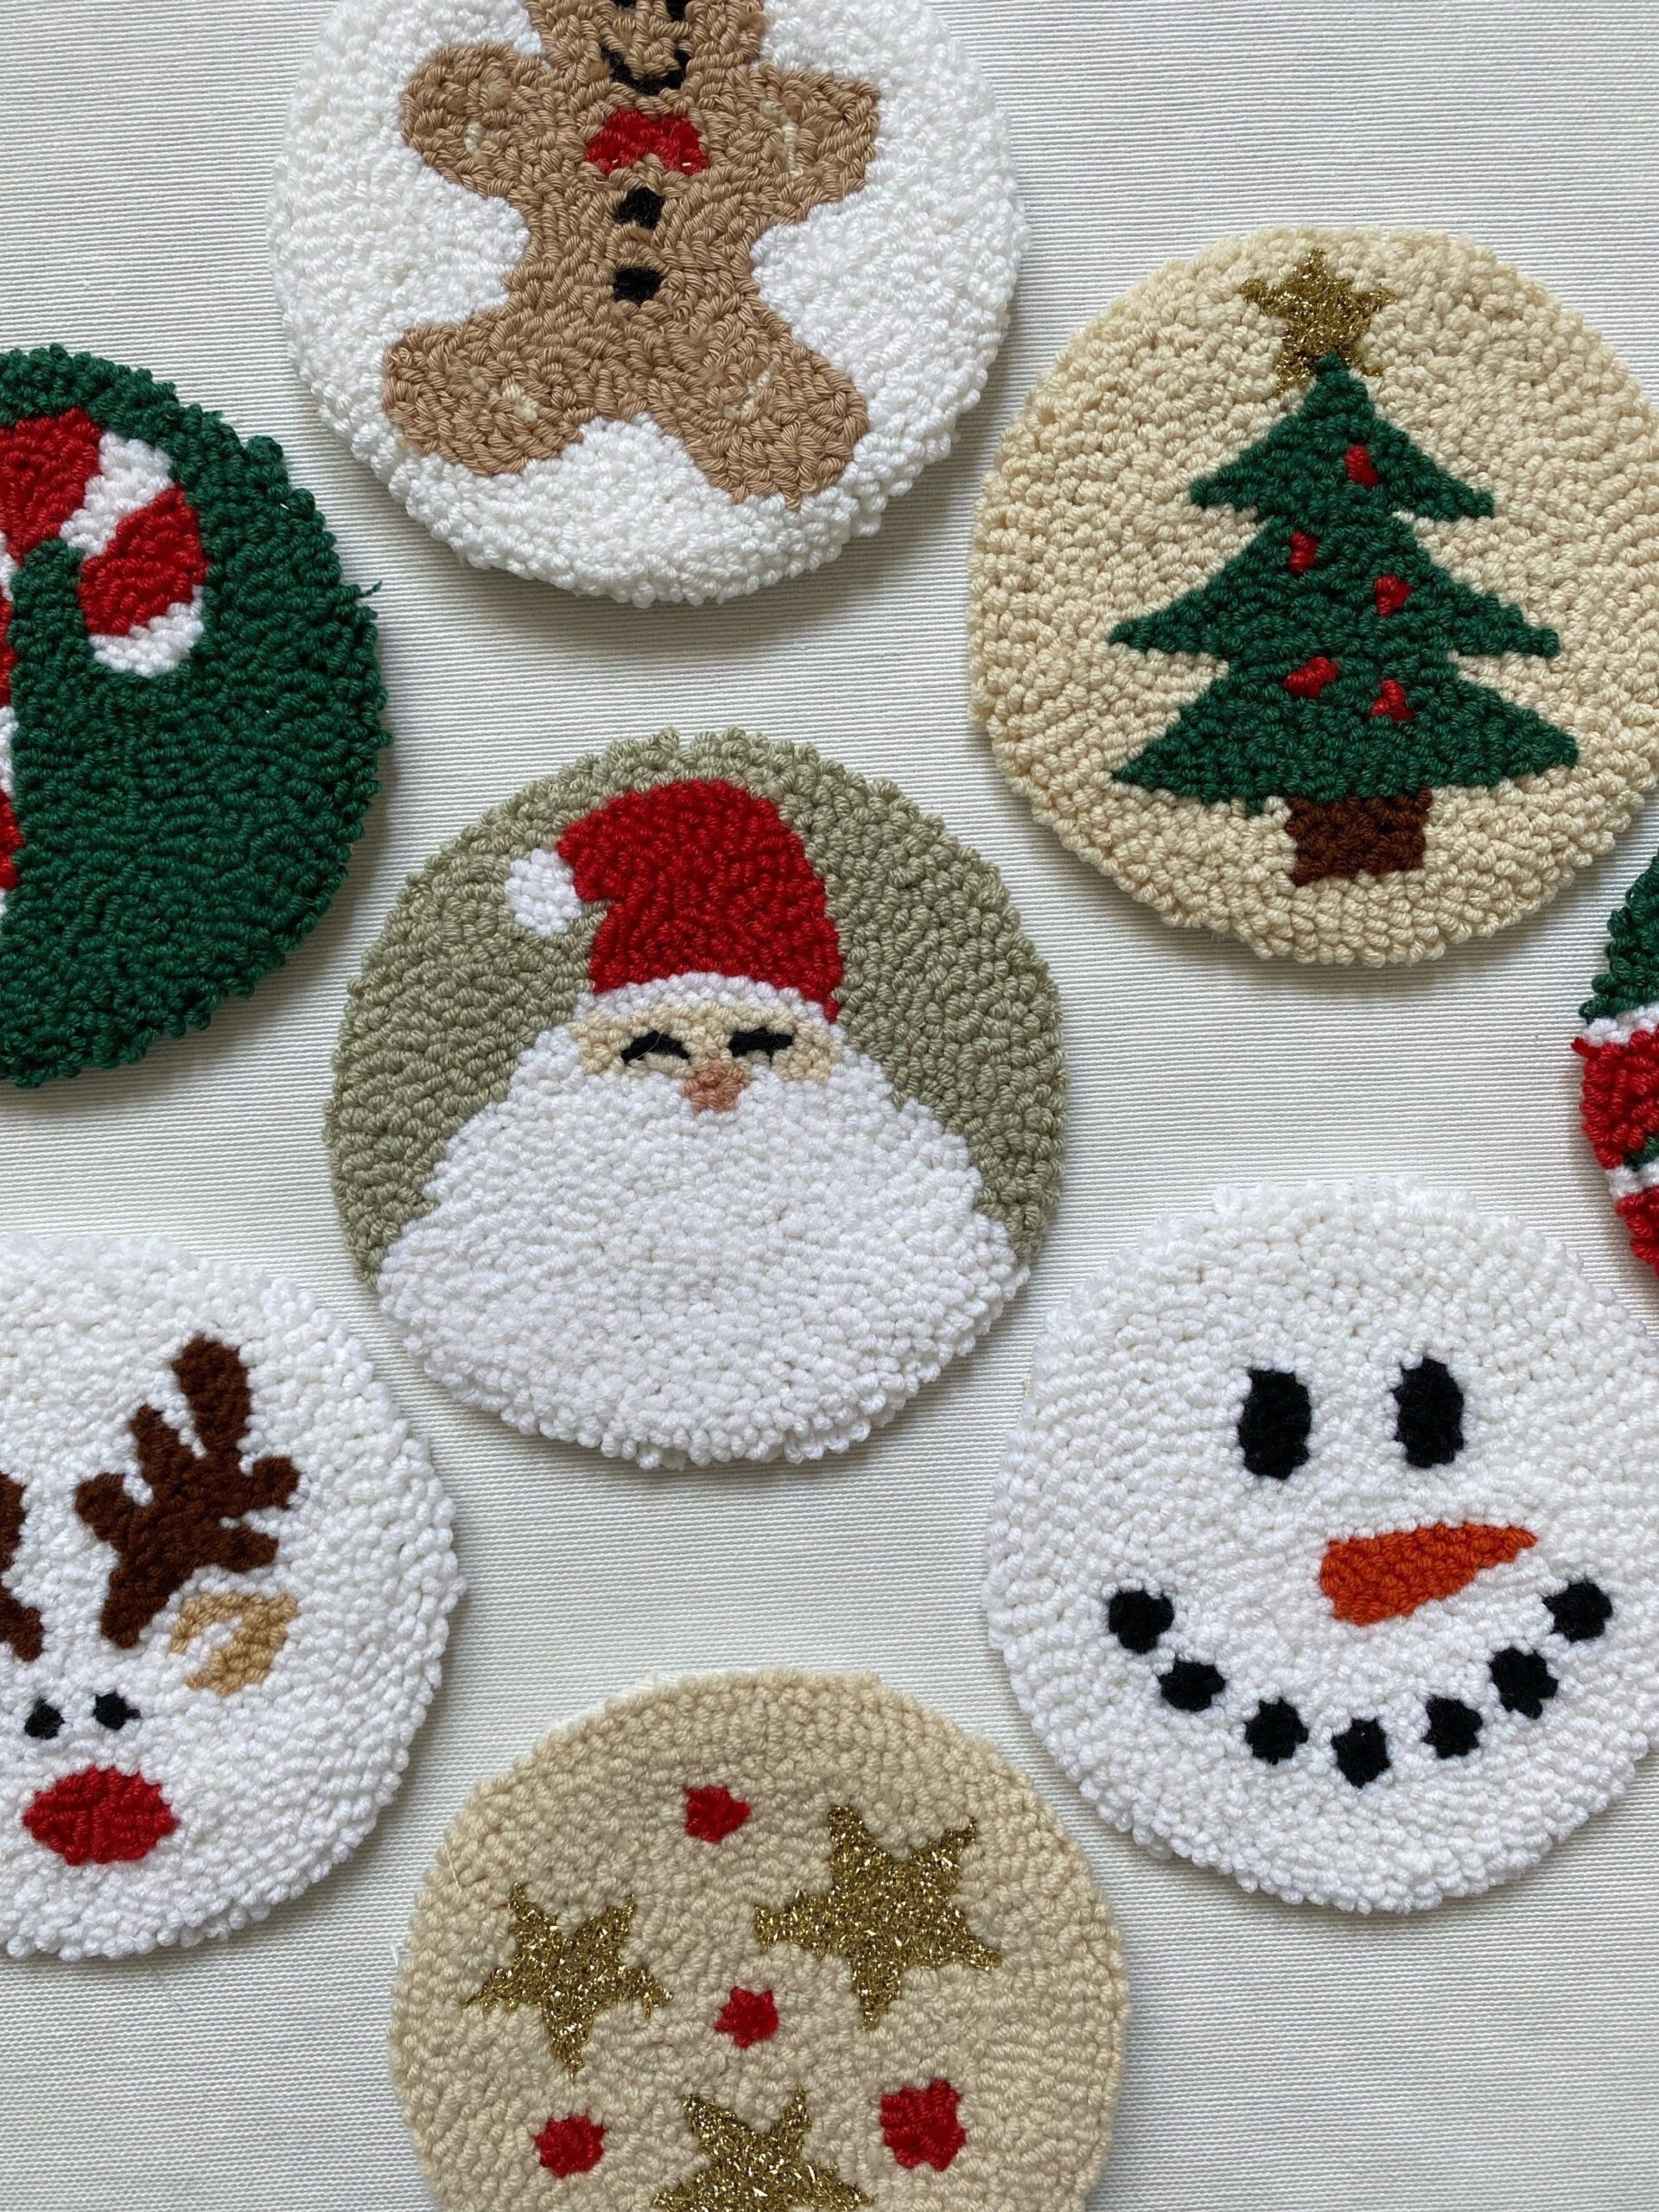 How to Choose the Right Christmas Rugs